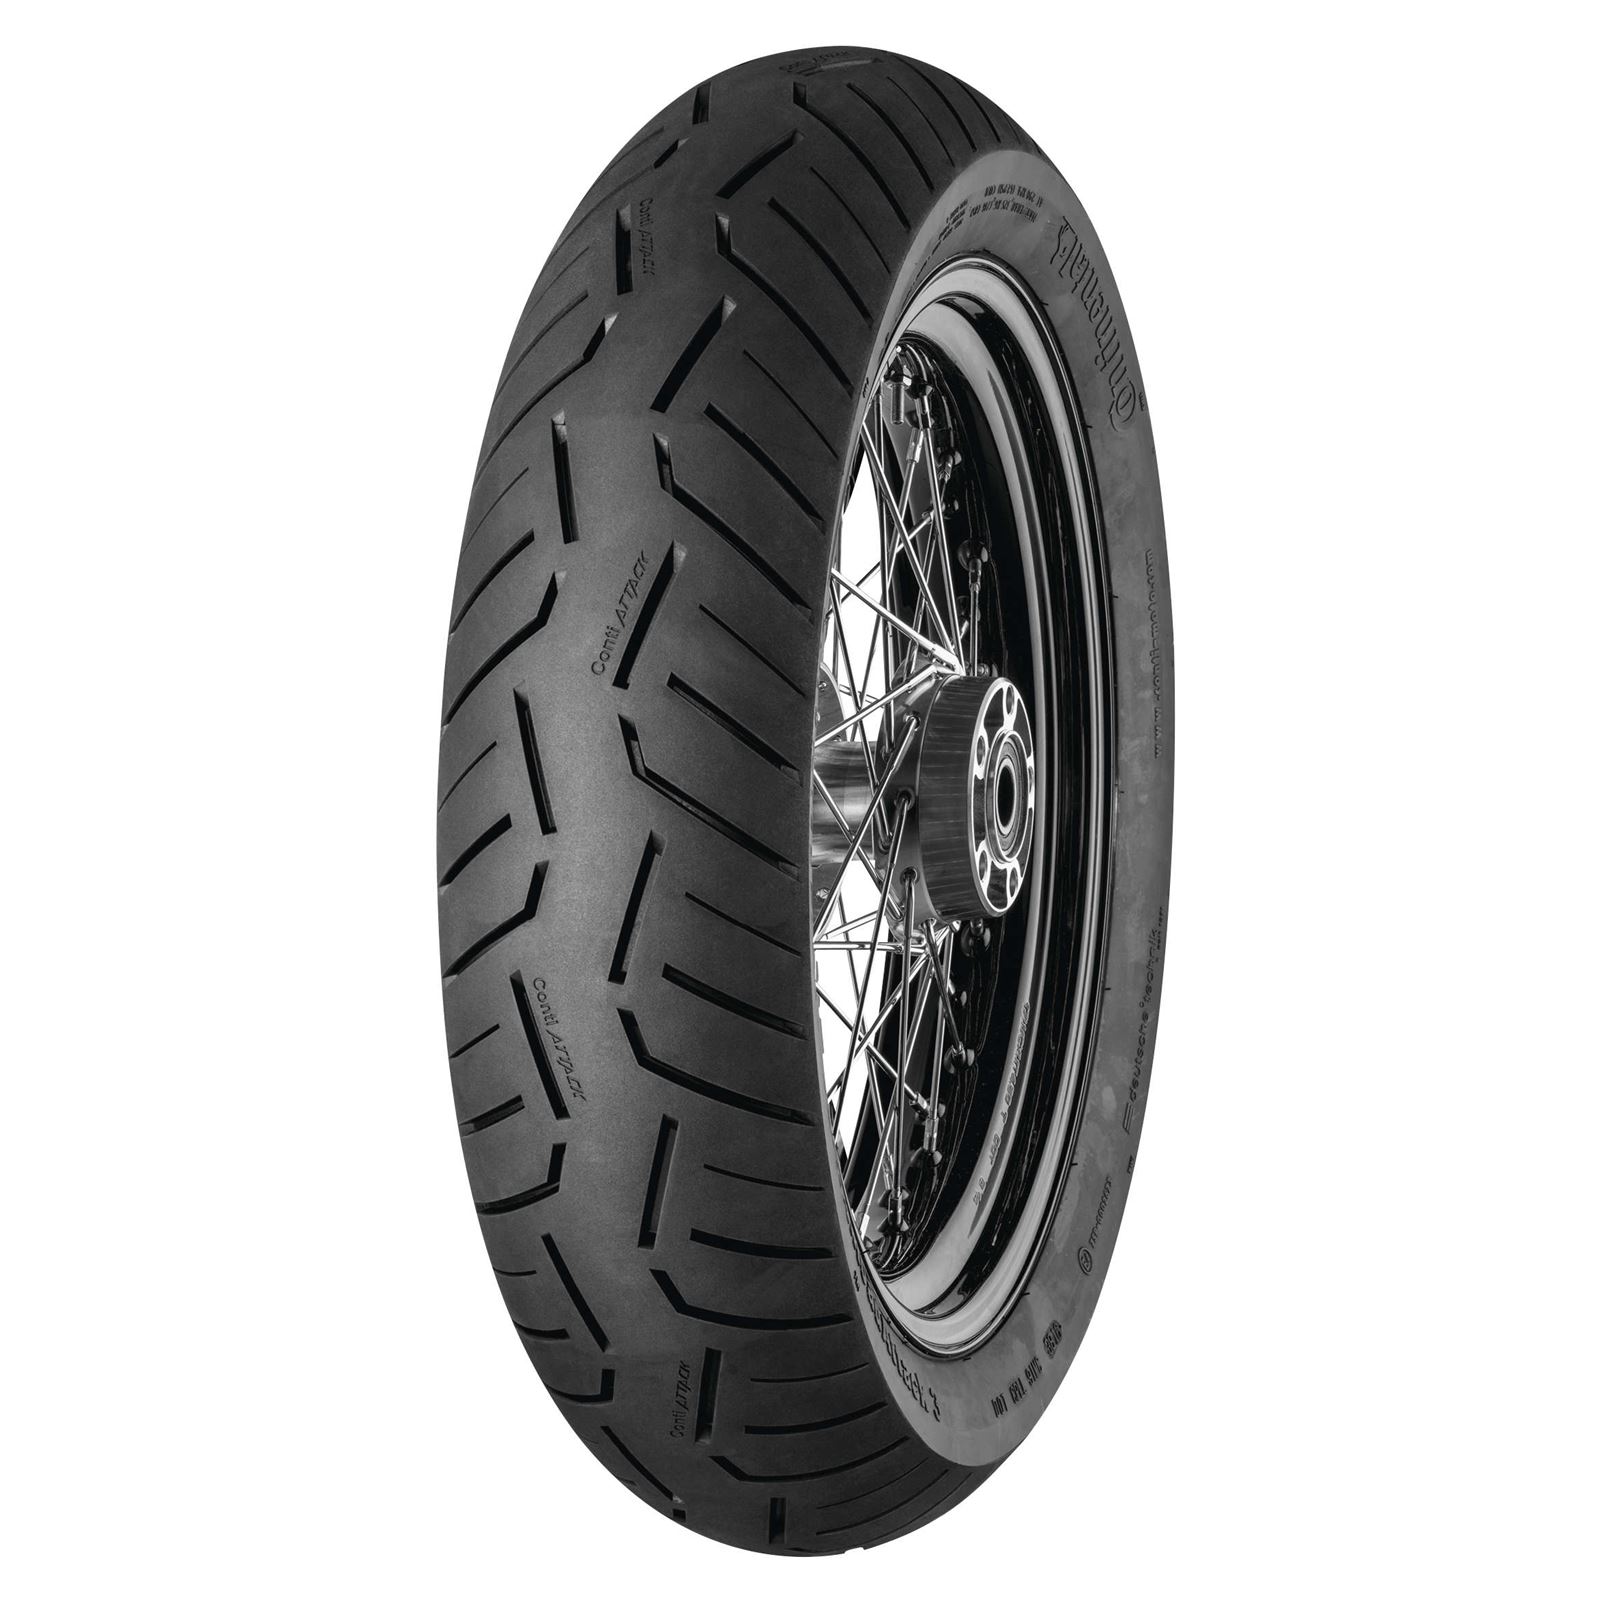 Continental Tire Road Attack 3, 120/70ZR19, Radial, Front, 60W